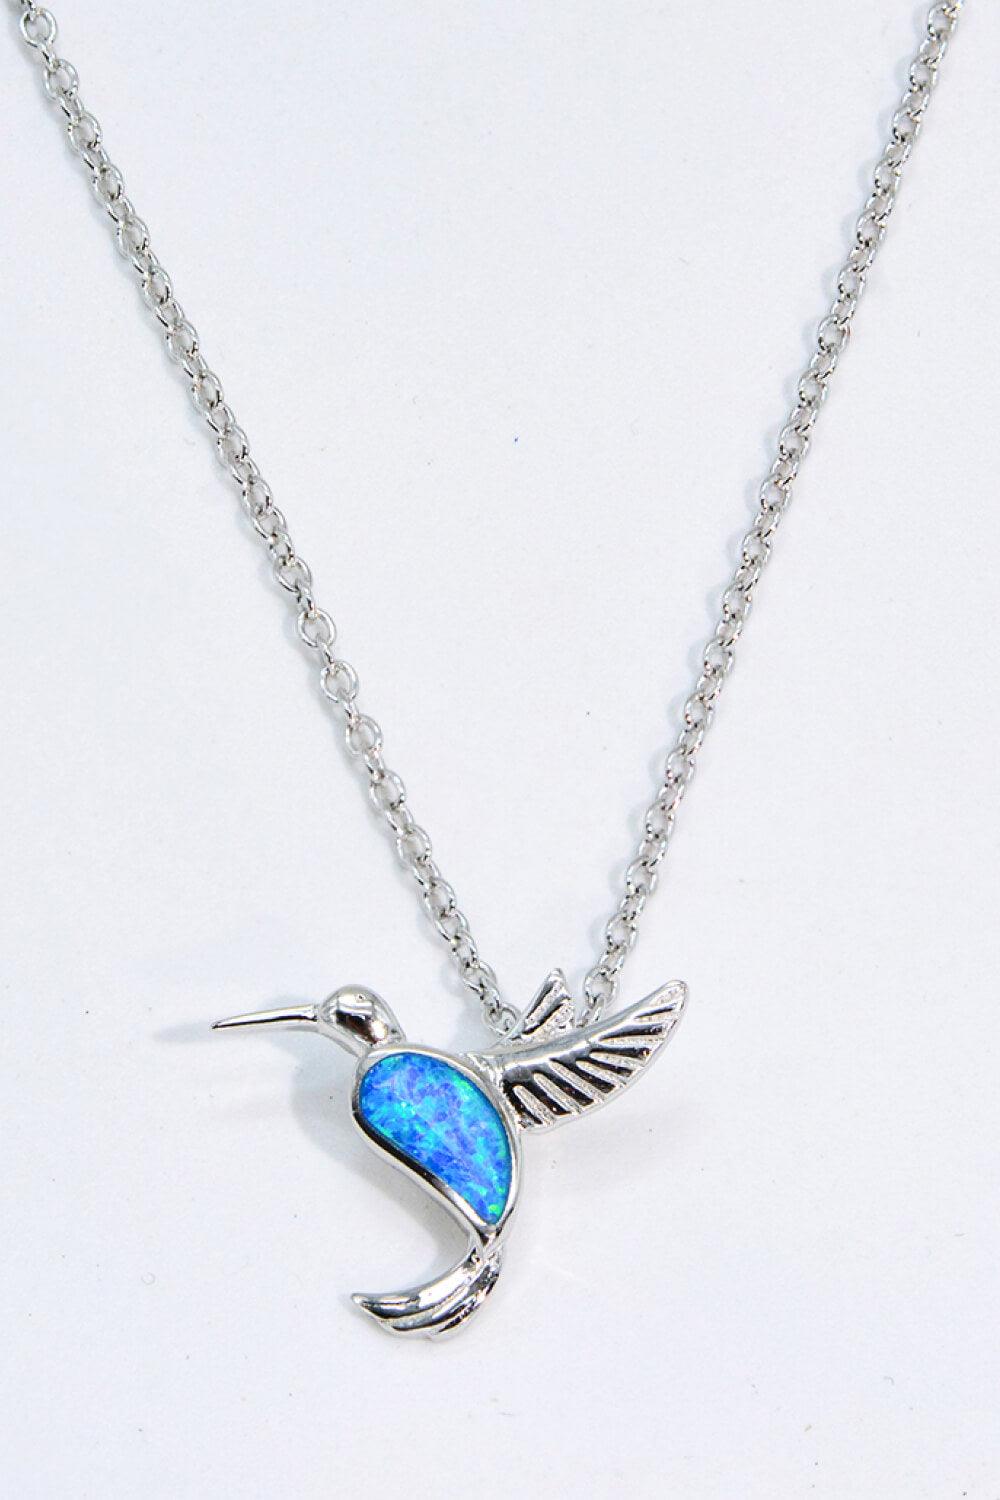 Blue Opal Hummingbird Necklace 925 Sterling Silver - Crazy Like a Daisy Boutique #